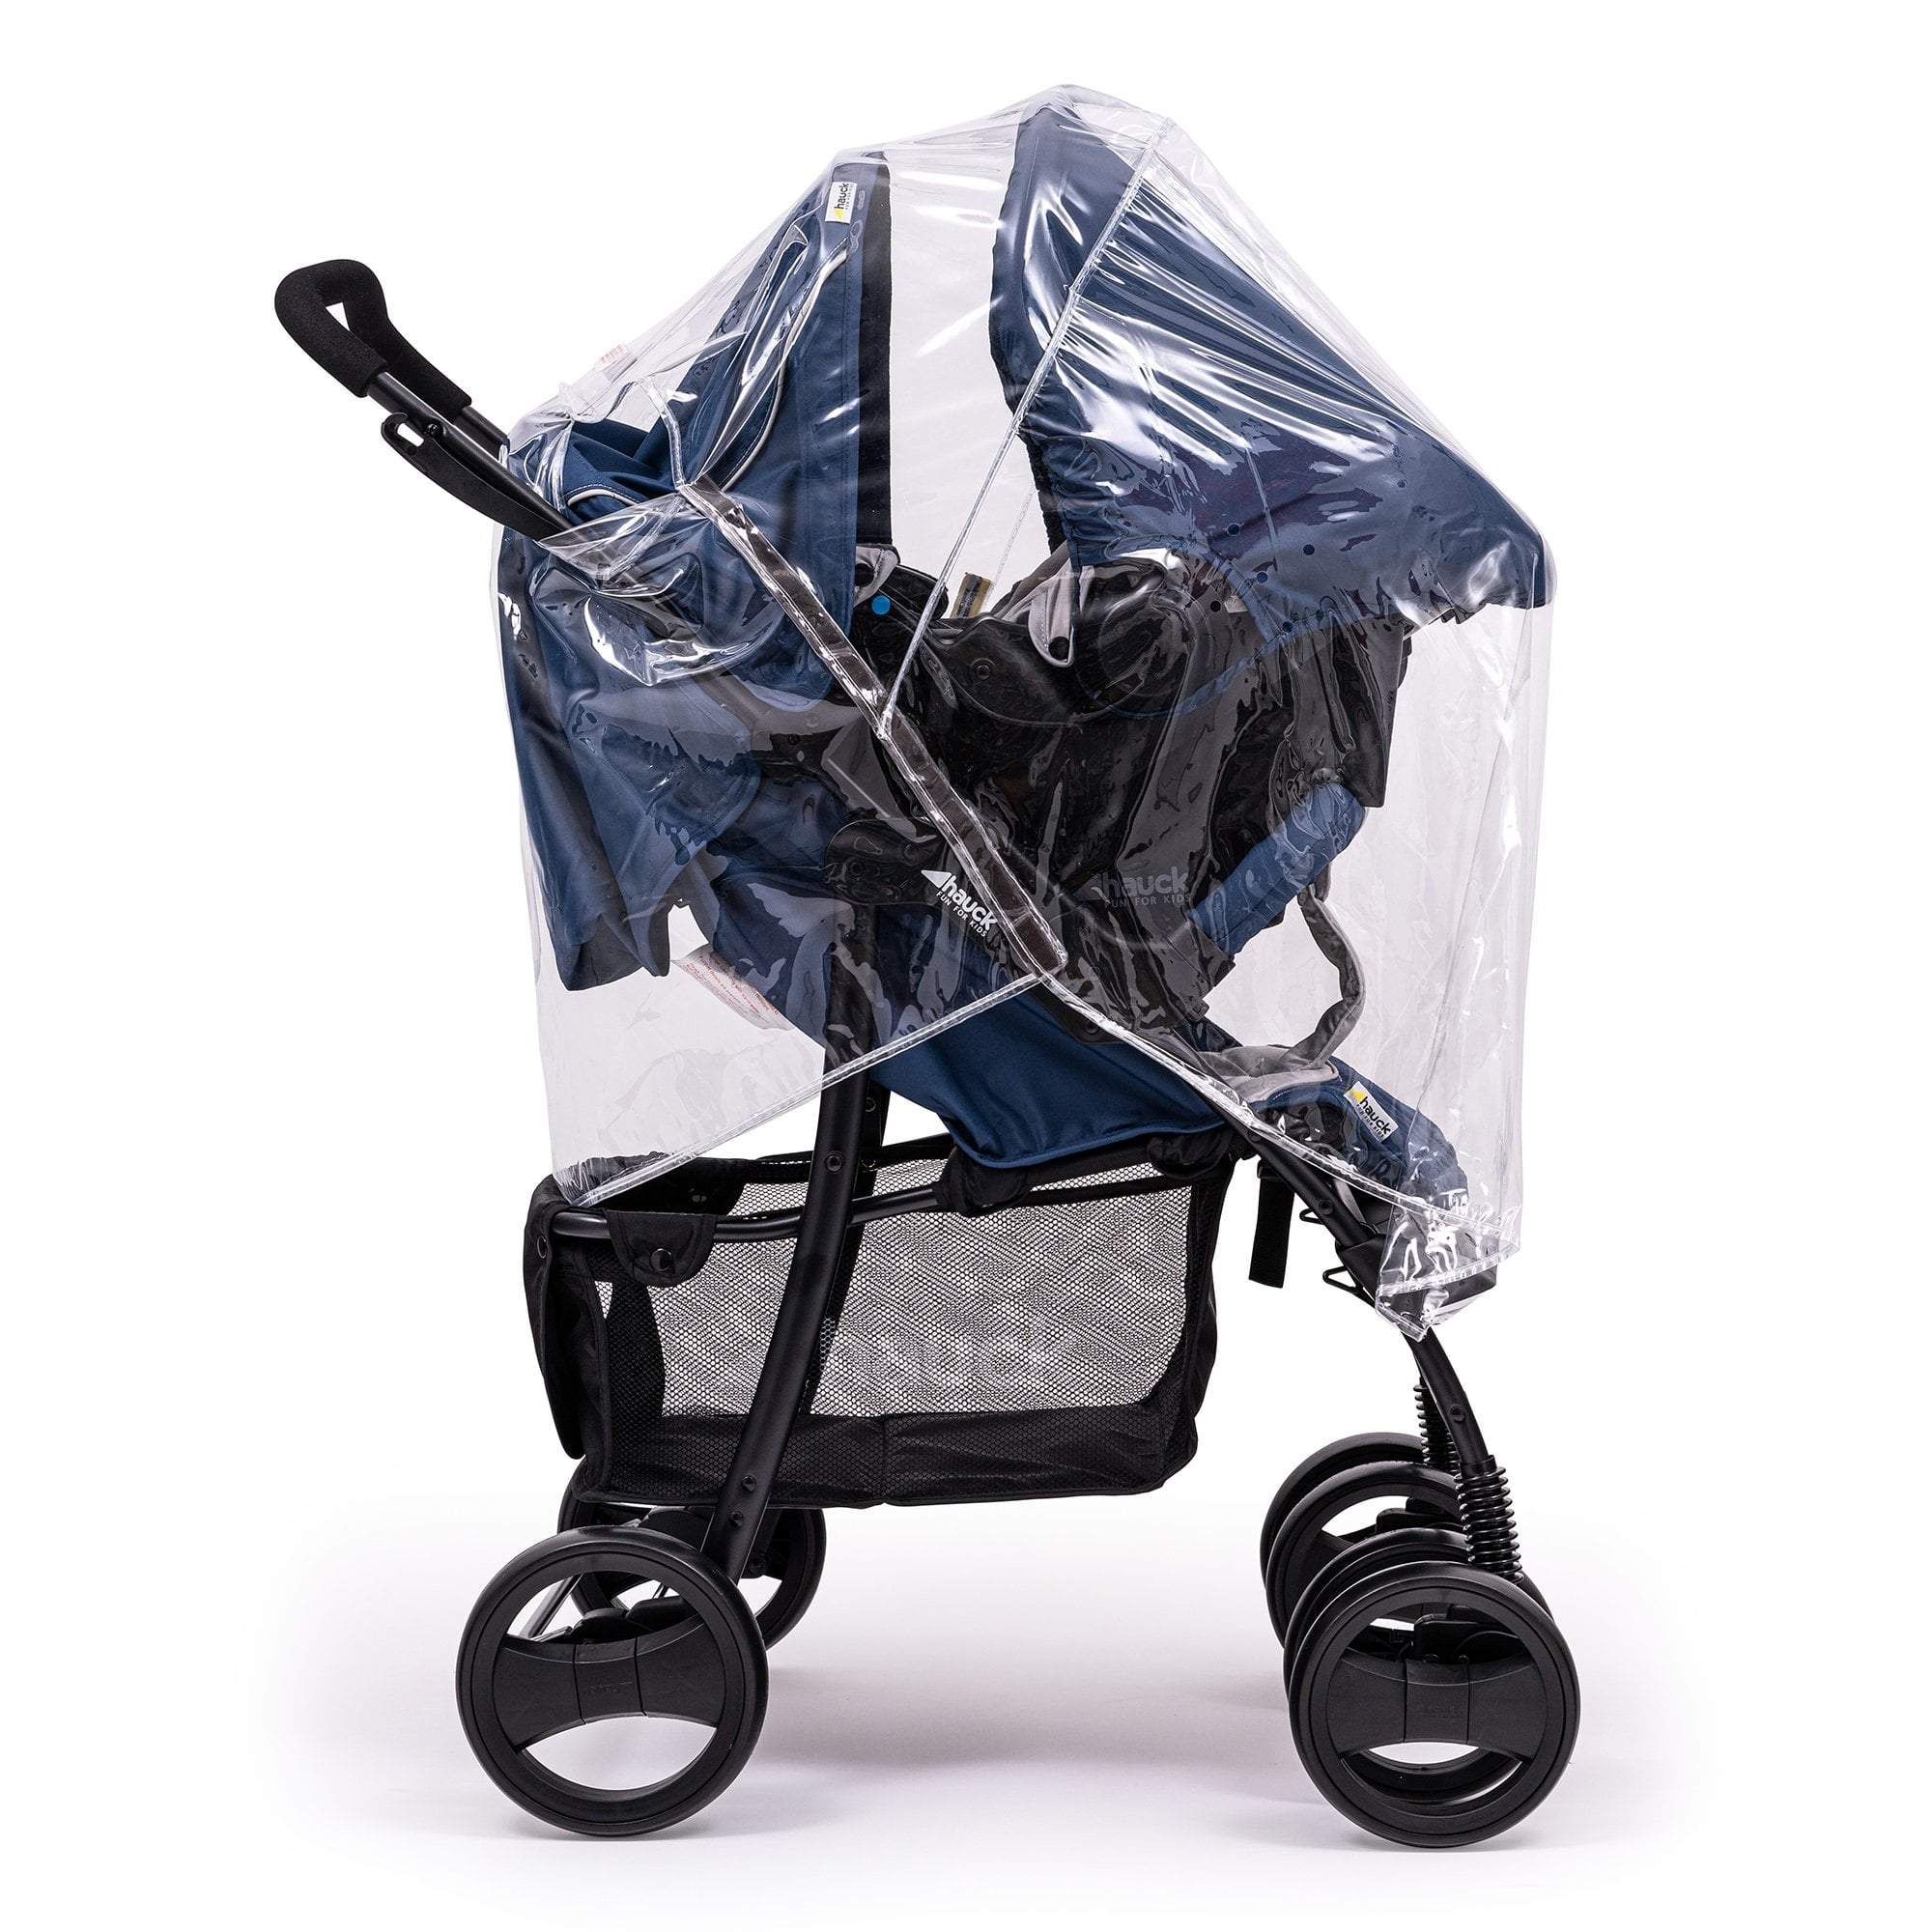 Travel System Raincover Compatible with Kiddicare - Fits All Models -  | For Your Little One